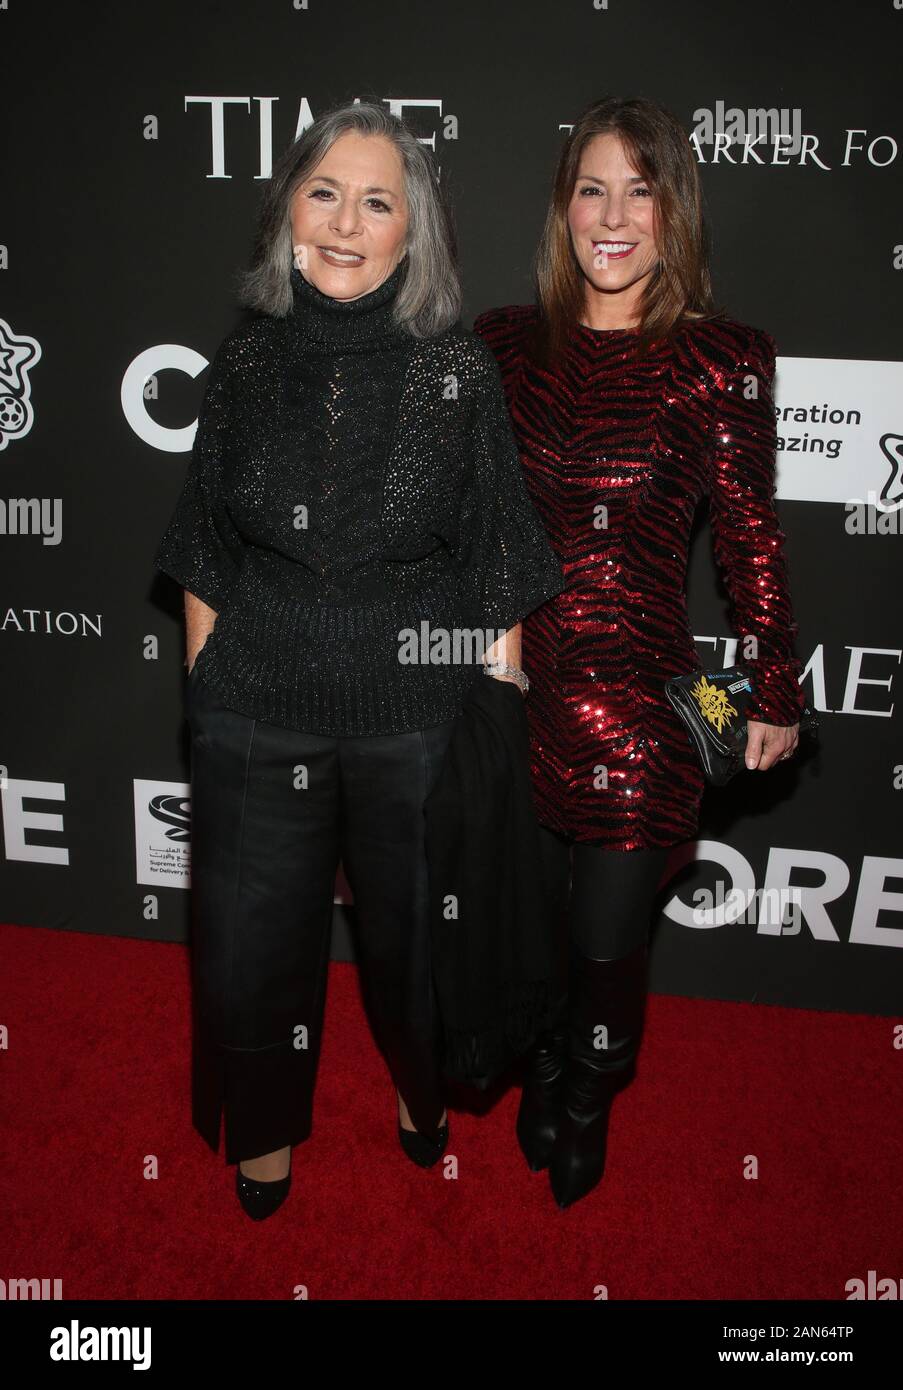 Los Angeles, Ca. 15th Jan, 2020. Barbara Boxer, Nicole Boxer, at 10th Anniversary Gala Benefiting CORE at The Wiltern Theatre in Los Angeles, California on January 15, 2020. Credit: Faye Sadou/Media Punch/Alamy Live News Stock Photo